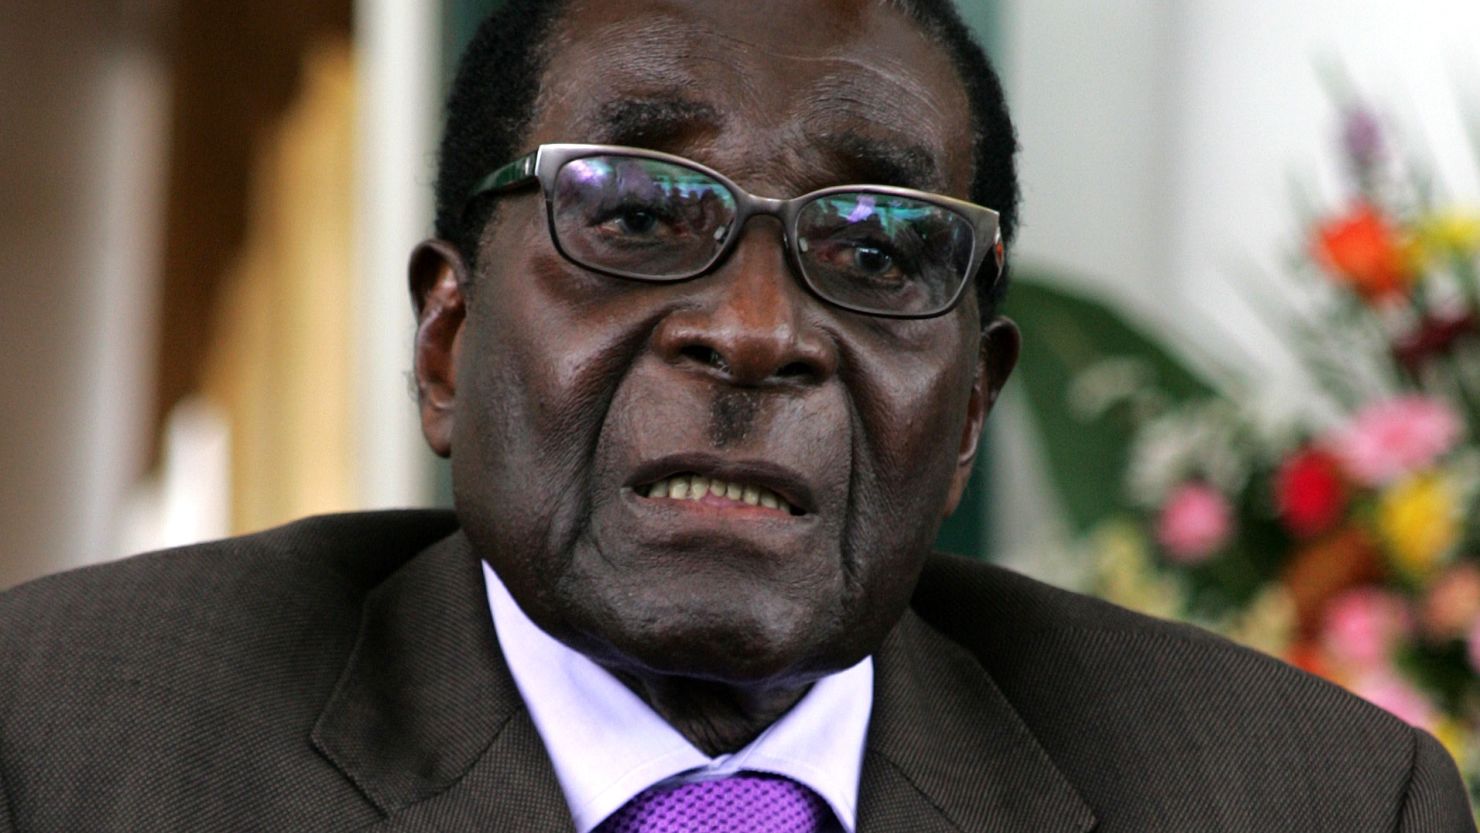 (File) Zimbabwe's President Robert Mugabe pictured here on January 17, 2013 in Harare.